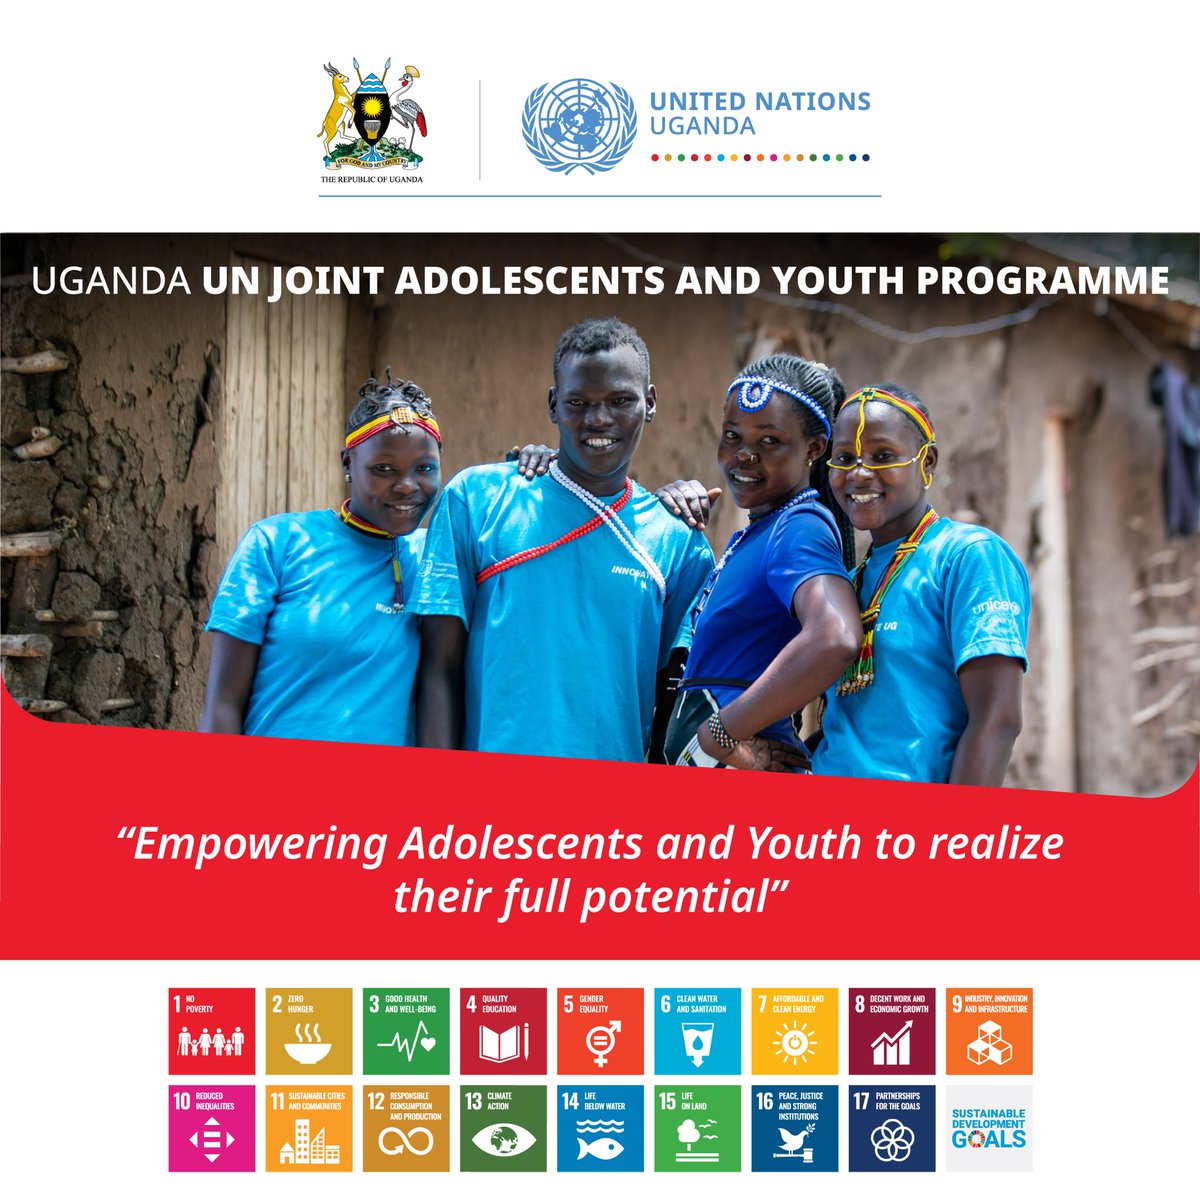 The proposed outcomes and outputs of the #UNJAYPUganda - a collaborative endeavor involving 13 @UNinUganda agencies - builds on the previous and ongoing UN and government-supported Adolescents and Youth interventions and reflect areas where accelerated action is needed.